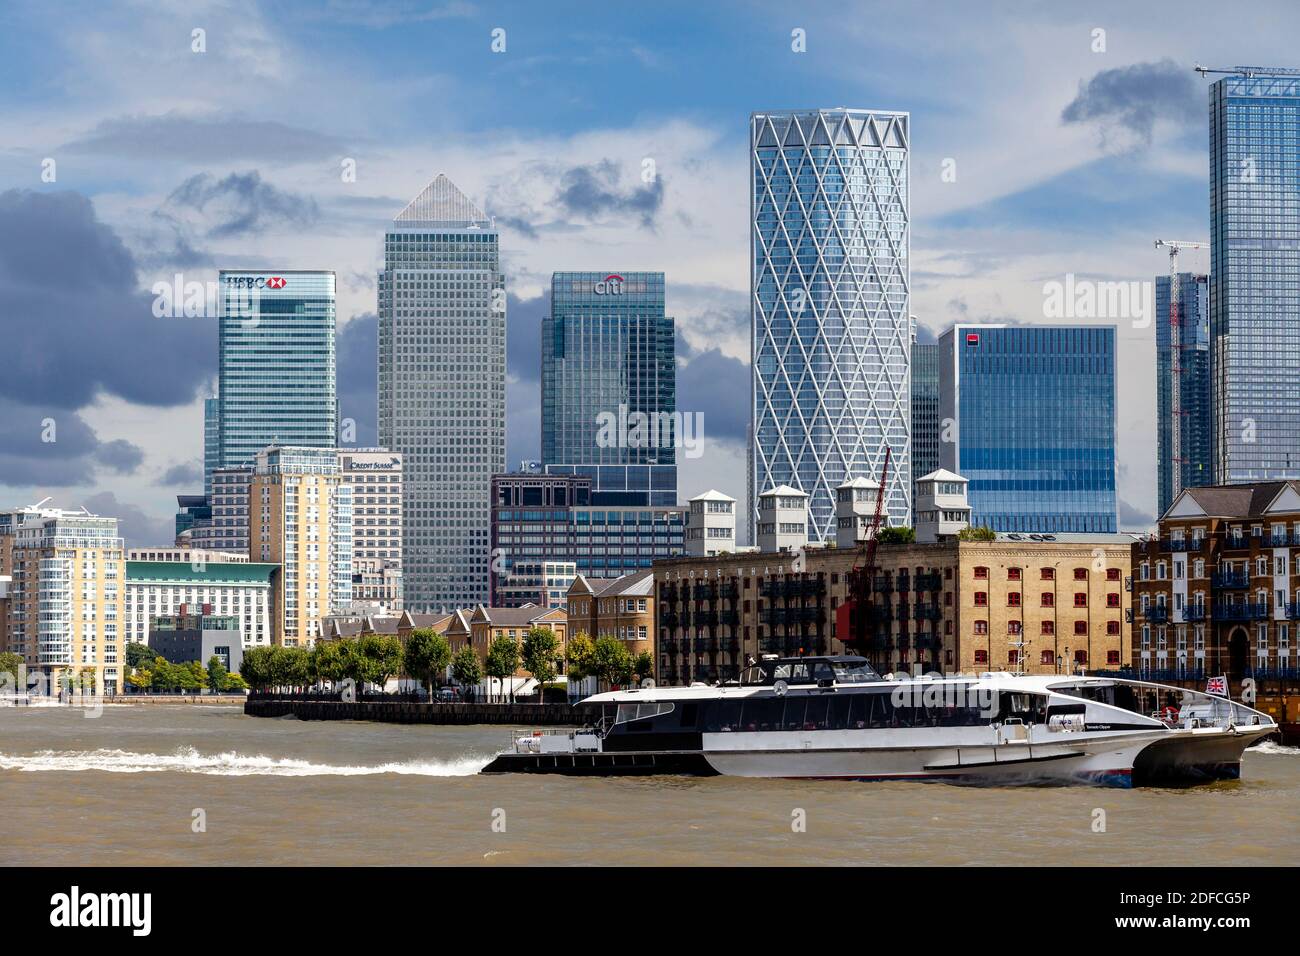 A Thames Clipper Passes The Canary Wharf District, London, UK. Stock Photo